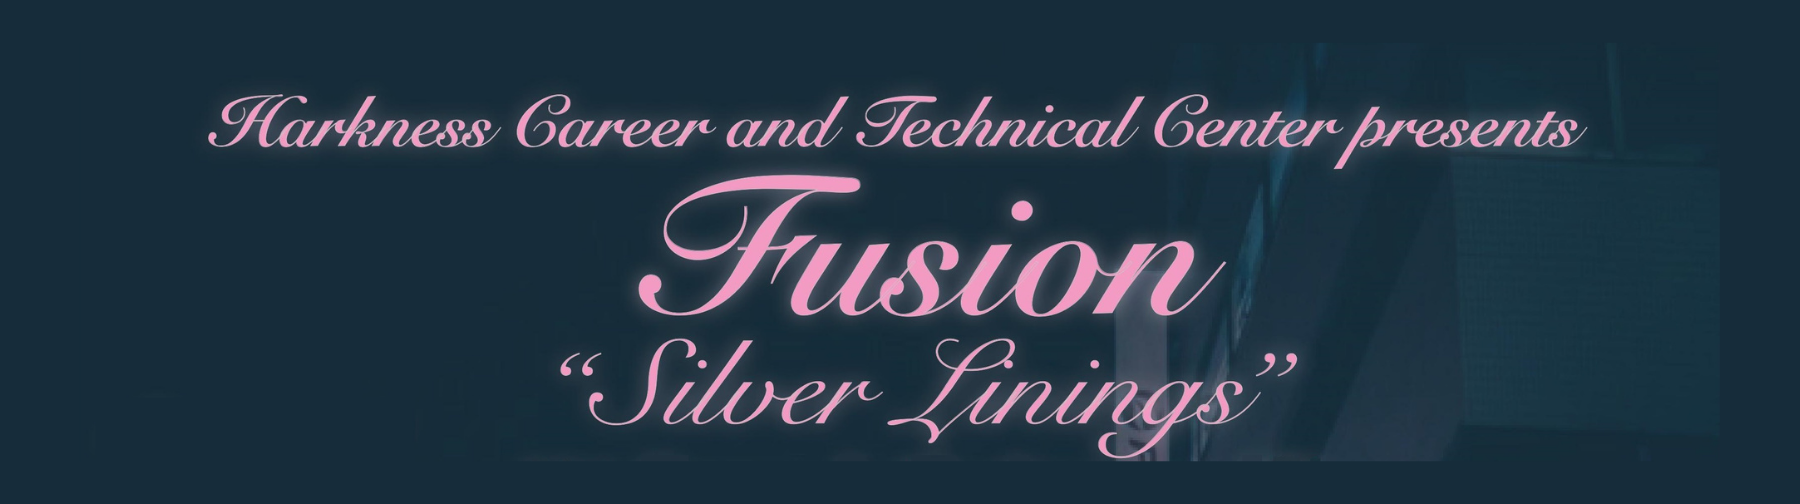 Harkness Career and Technical Center Presents Fusion "Silver Linings"